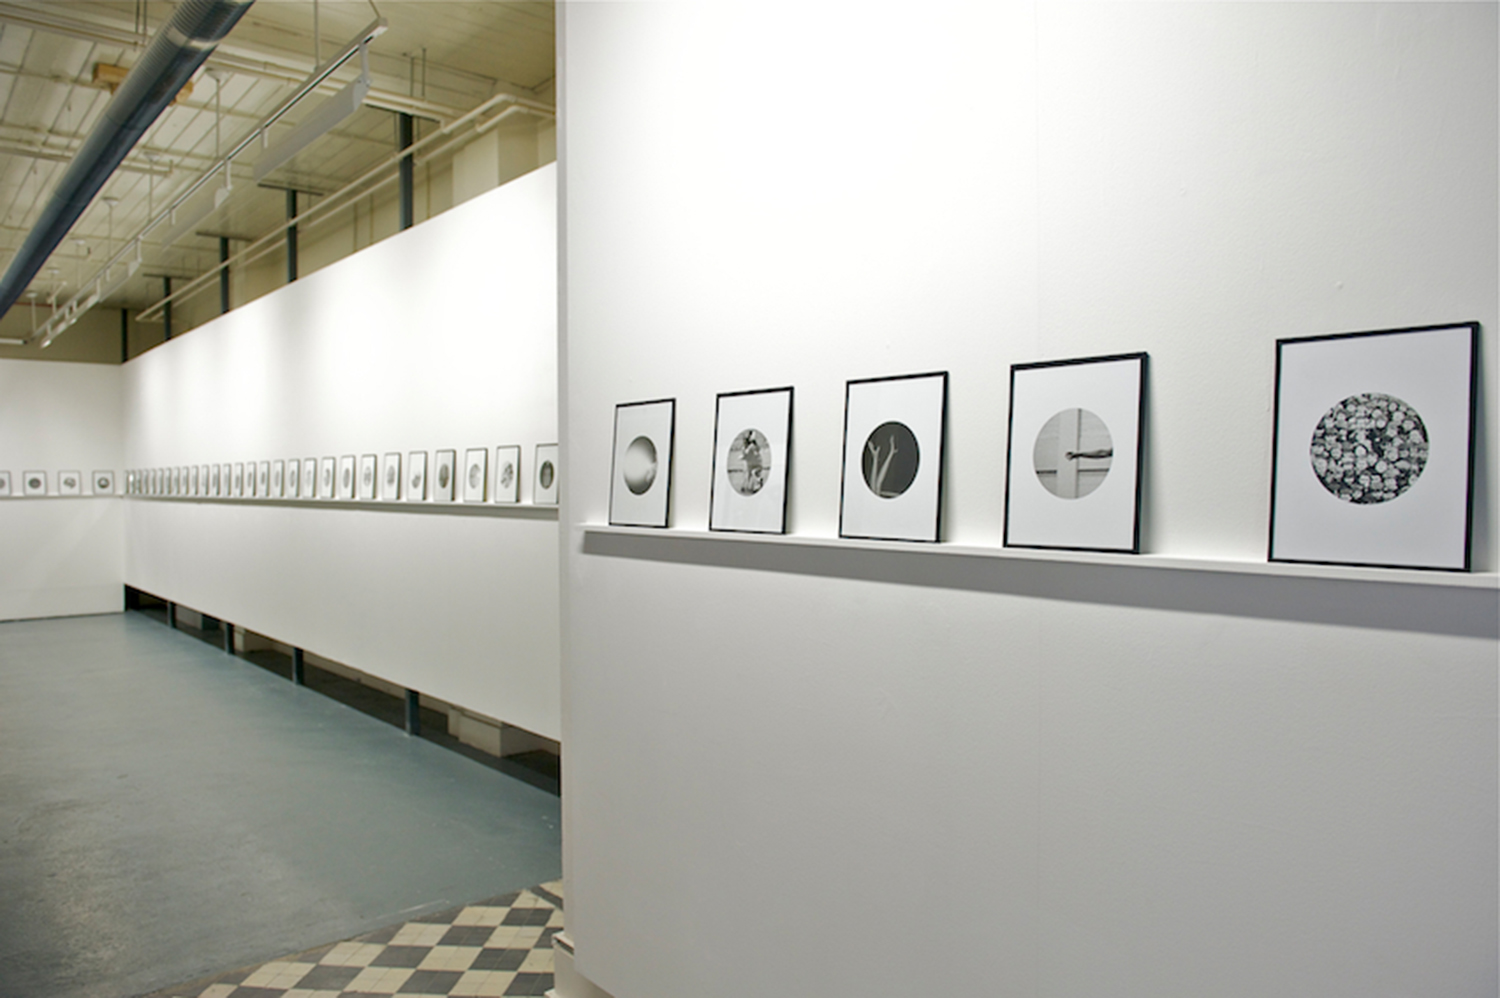  People in Trouble Laughing Pushed to the Ground (Dots), Installation View, Northern Ireland: 30 Years of Photography, Belfast Exposed, 2012 